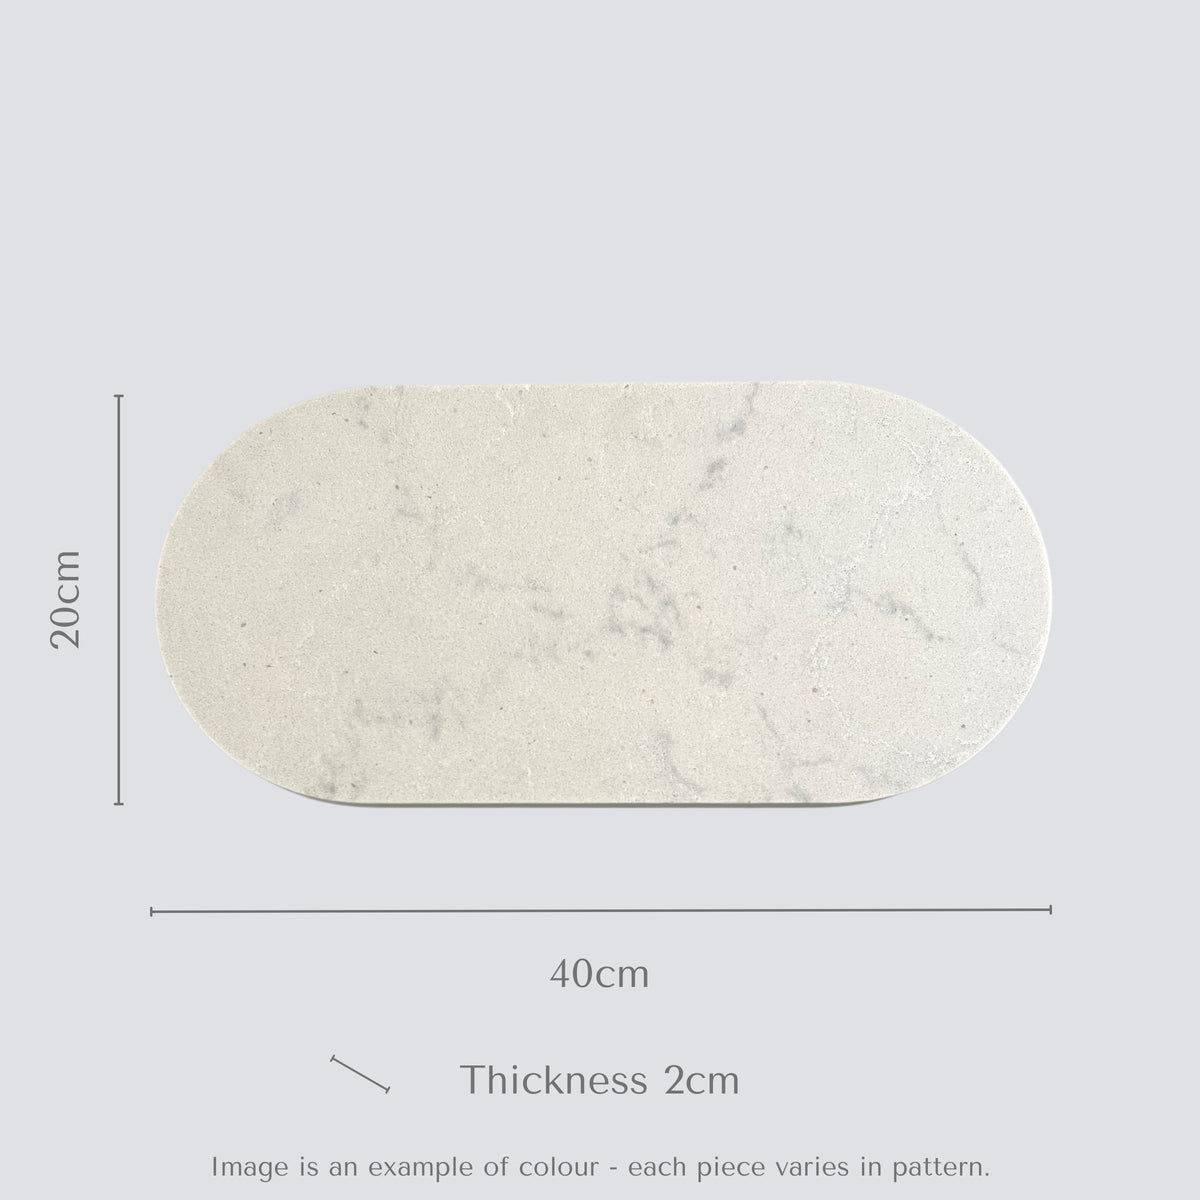 Double arch quartz serving platter in Caesarstone Georgian Bluffs™ created by Aureliia Collection. Unstyled food platter shows product colour a cloudy light grey, with delicate dashes of soft charcoal that disappear and resurface. An excellent home decor gift for someone who has it all.